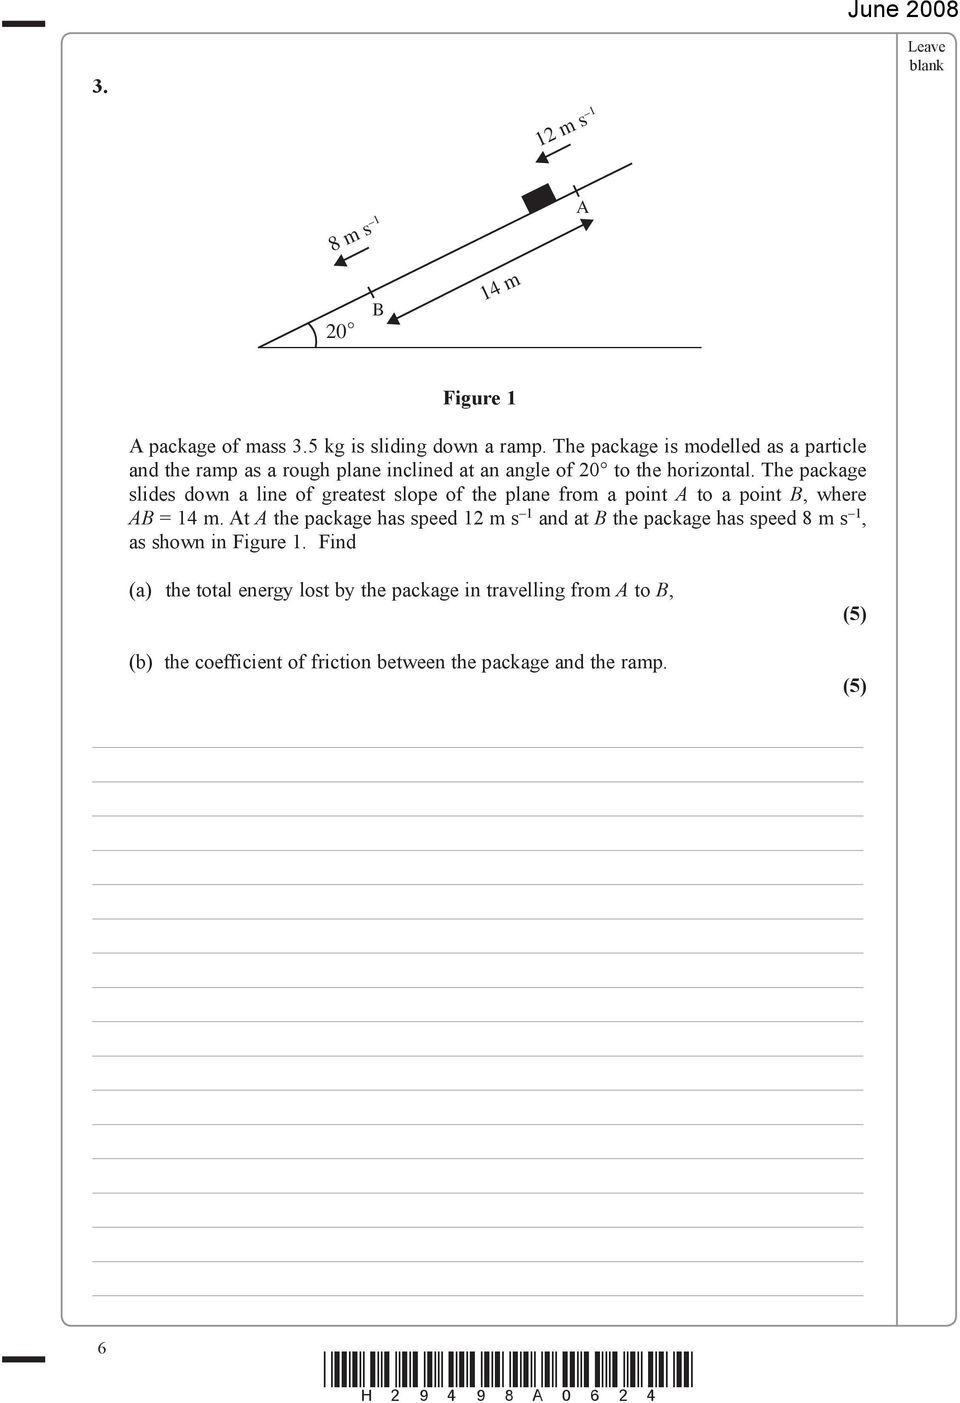 The package slides down a line of greatest slope of the plane from a point A to a point B, where AB = 14 m.